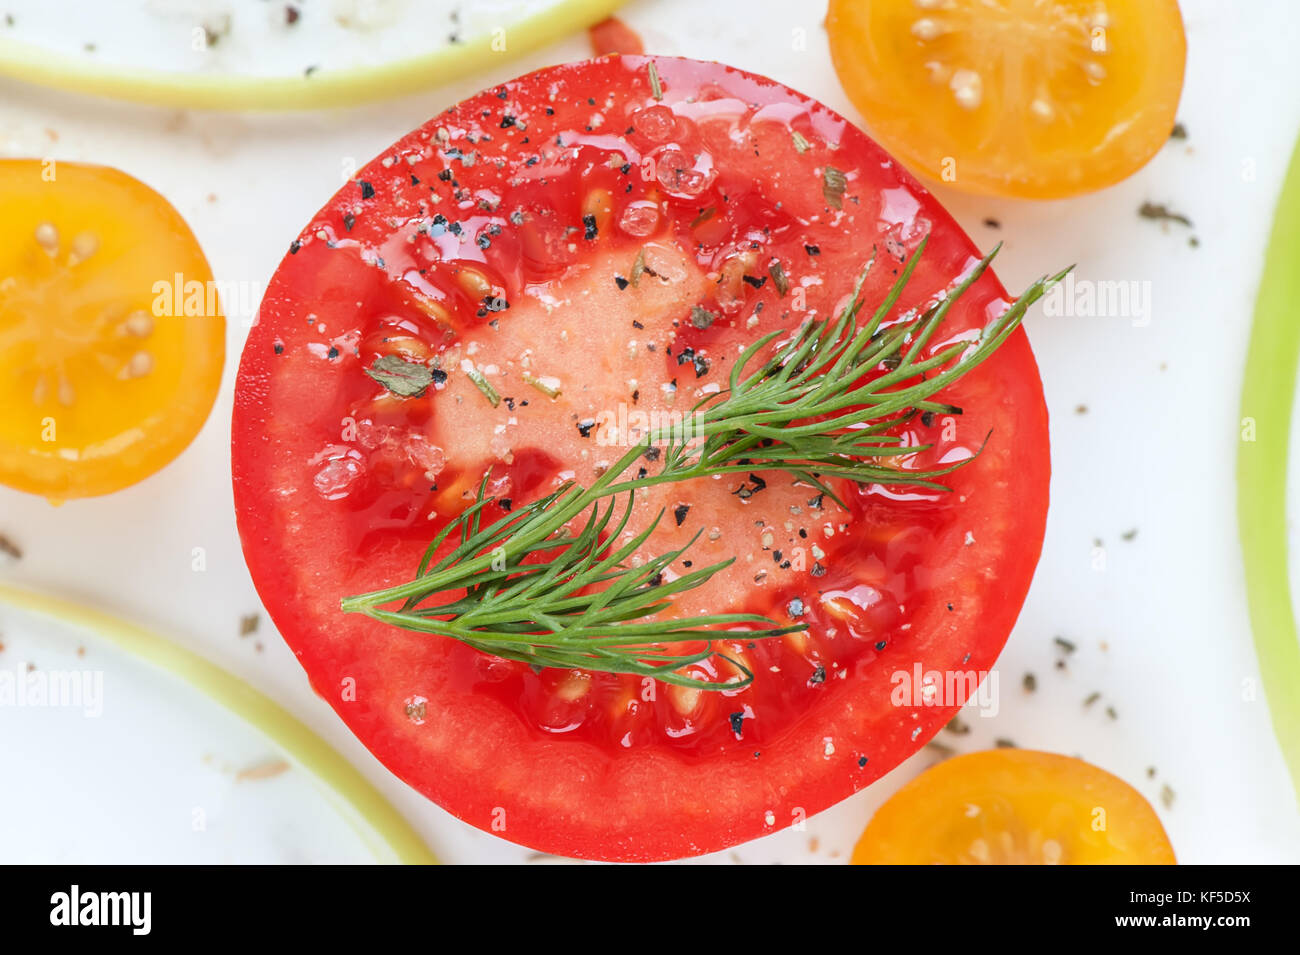 Round juicy slice of red tomato with herbs de Provence, sea salt and slices  of yellow tomatoes. The horizontal frame Stock Photo - Alamy